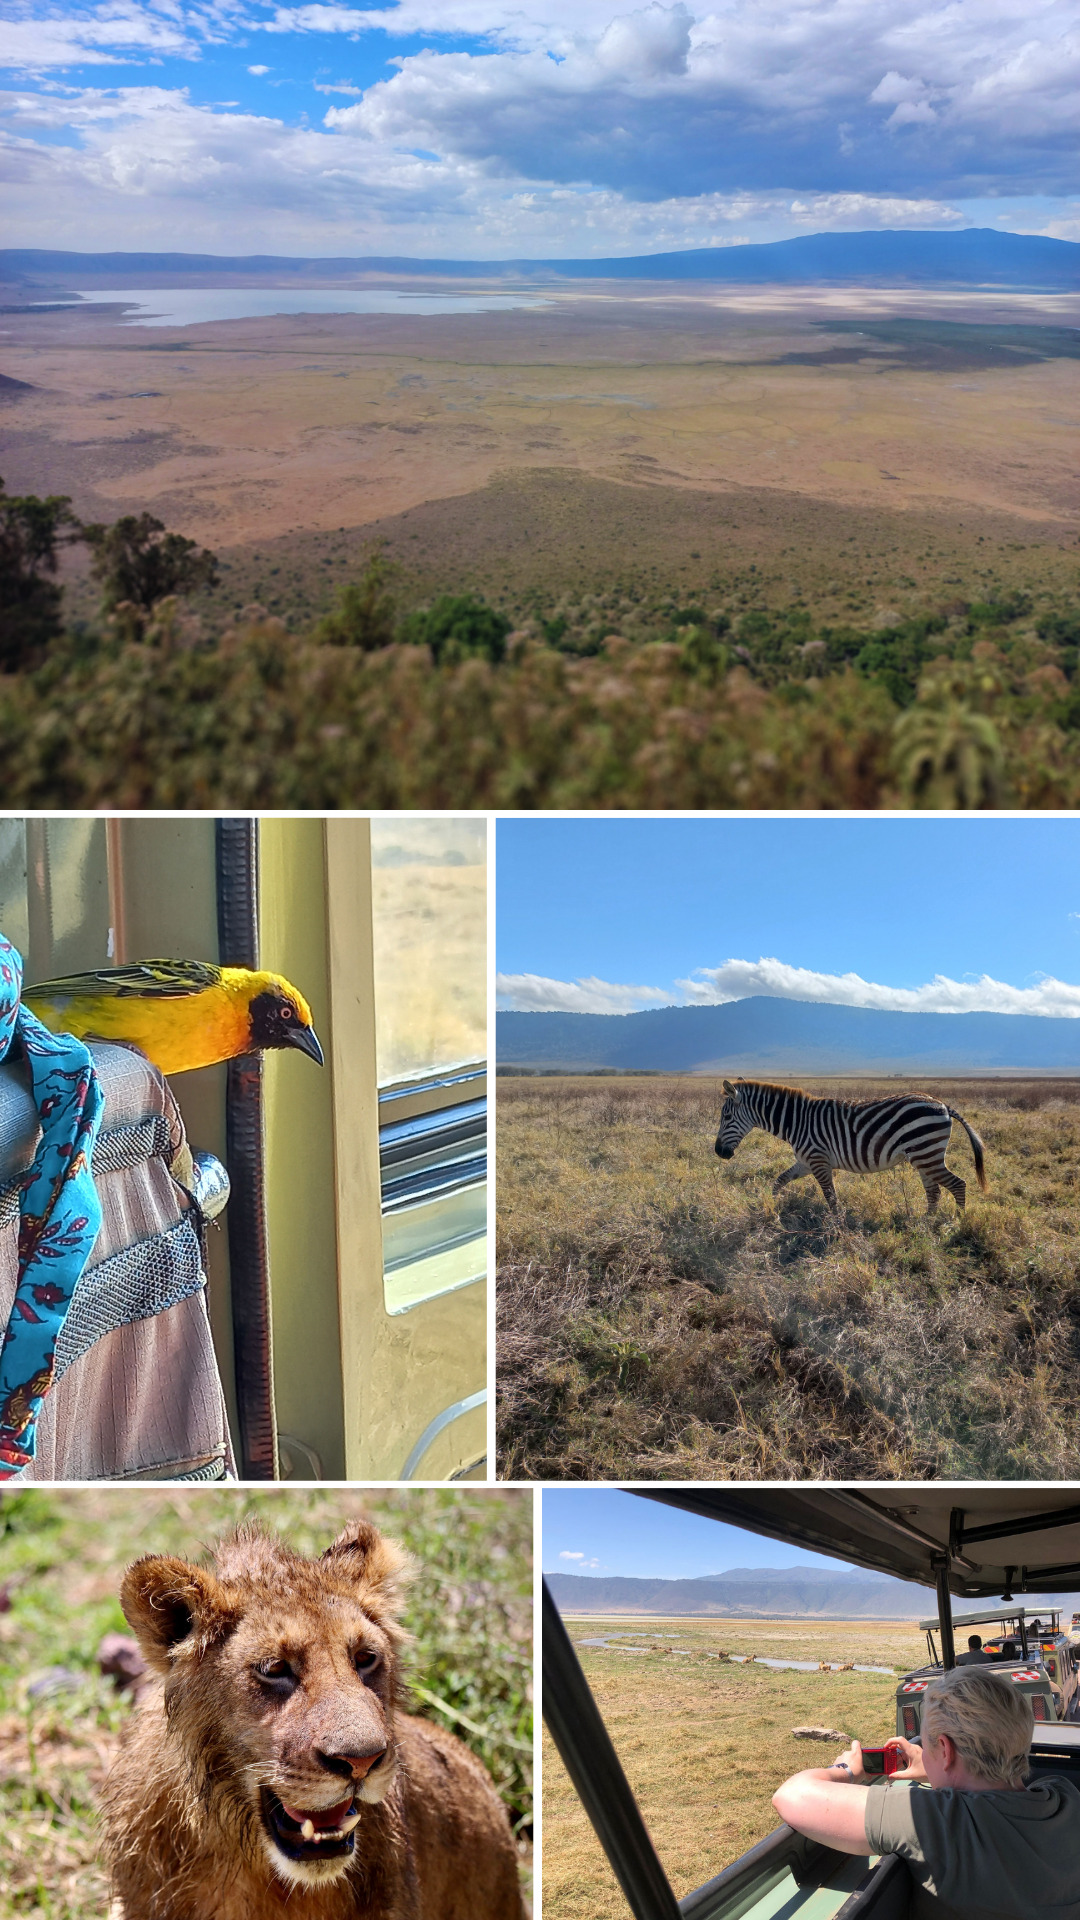 Daisy's photos from the Ngorongoro Crater game drive